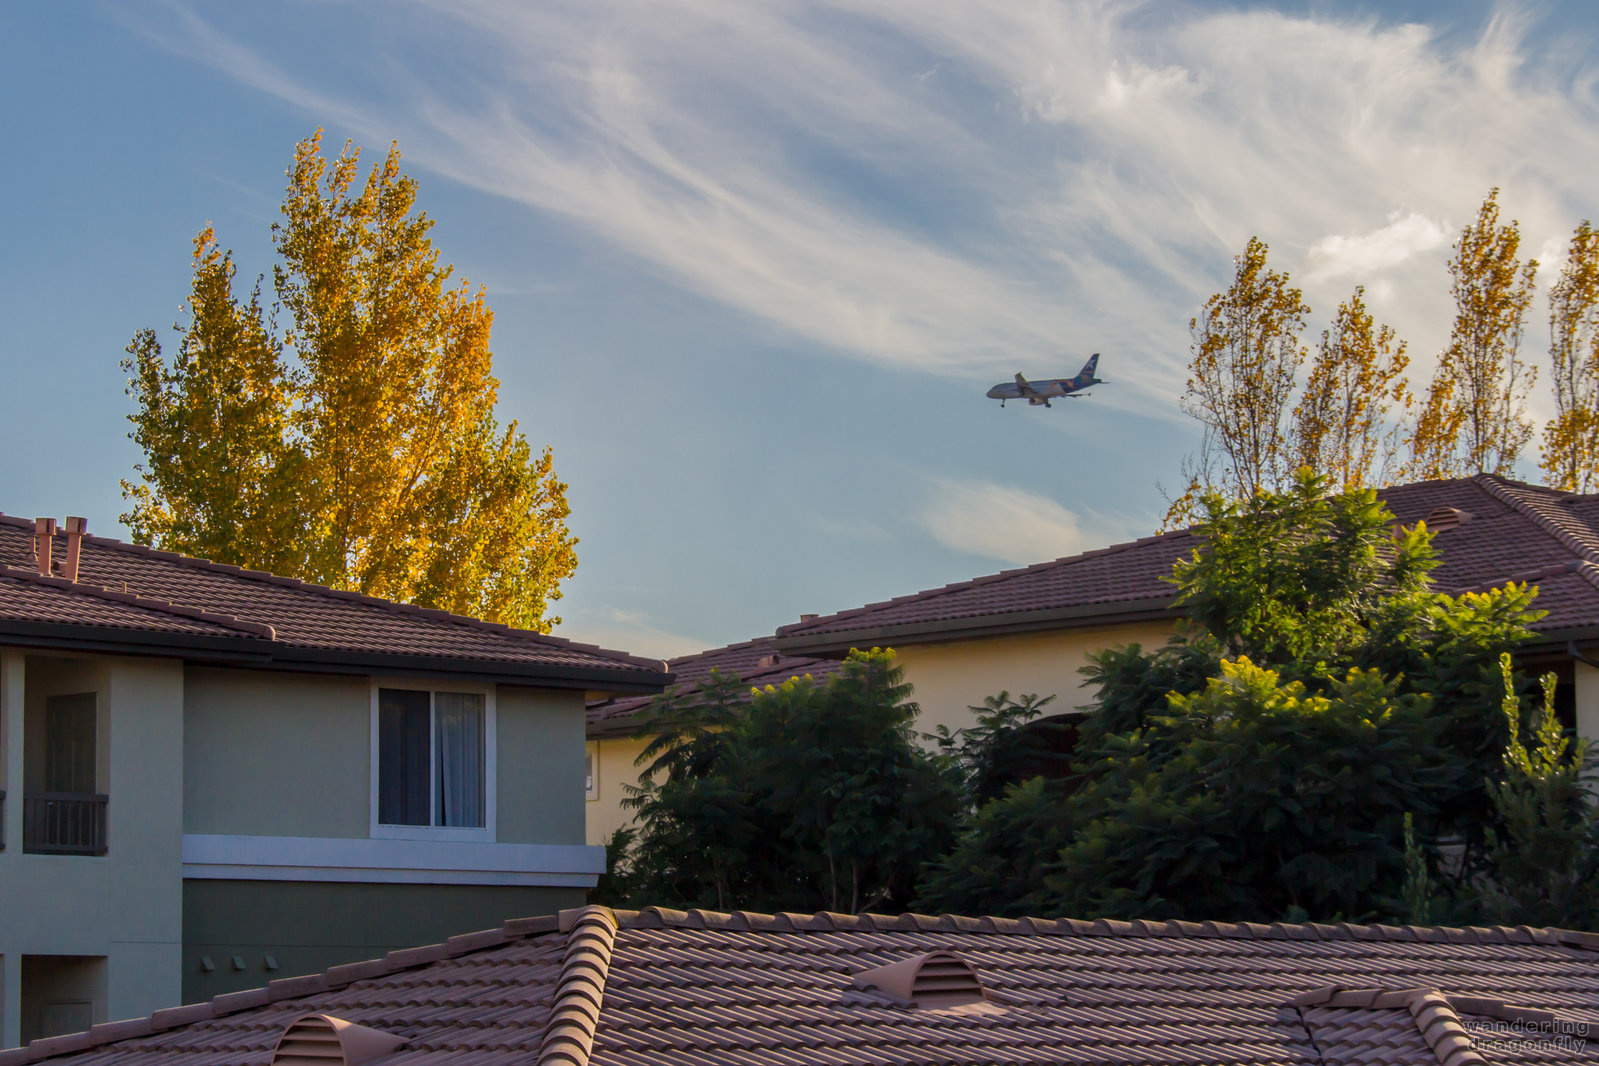 Those huge airplanes were zooming away literally above our heads -- airplane, autumn, cloud, house, sky, tree